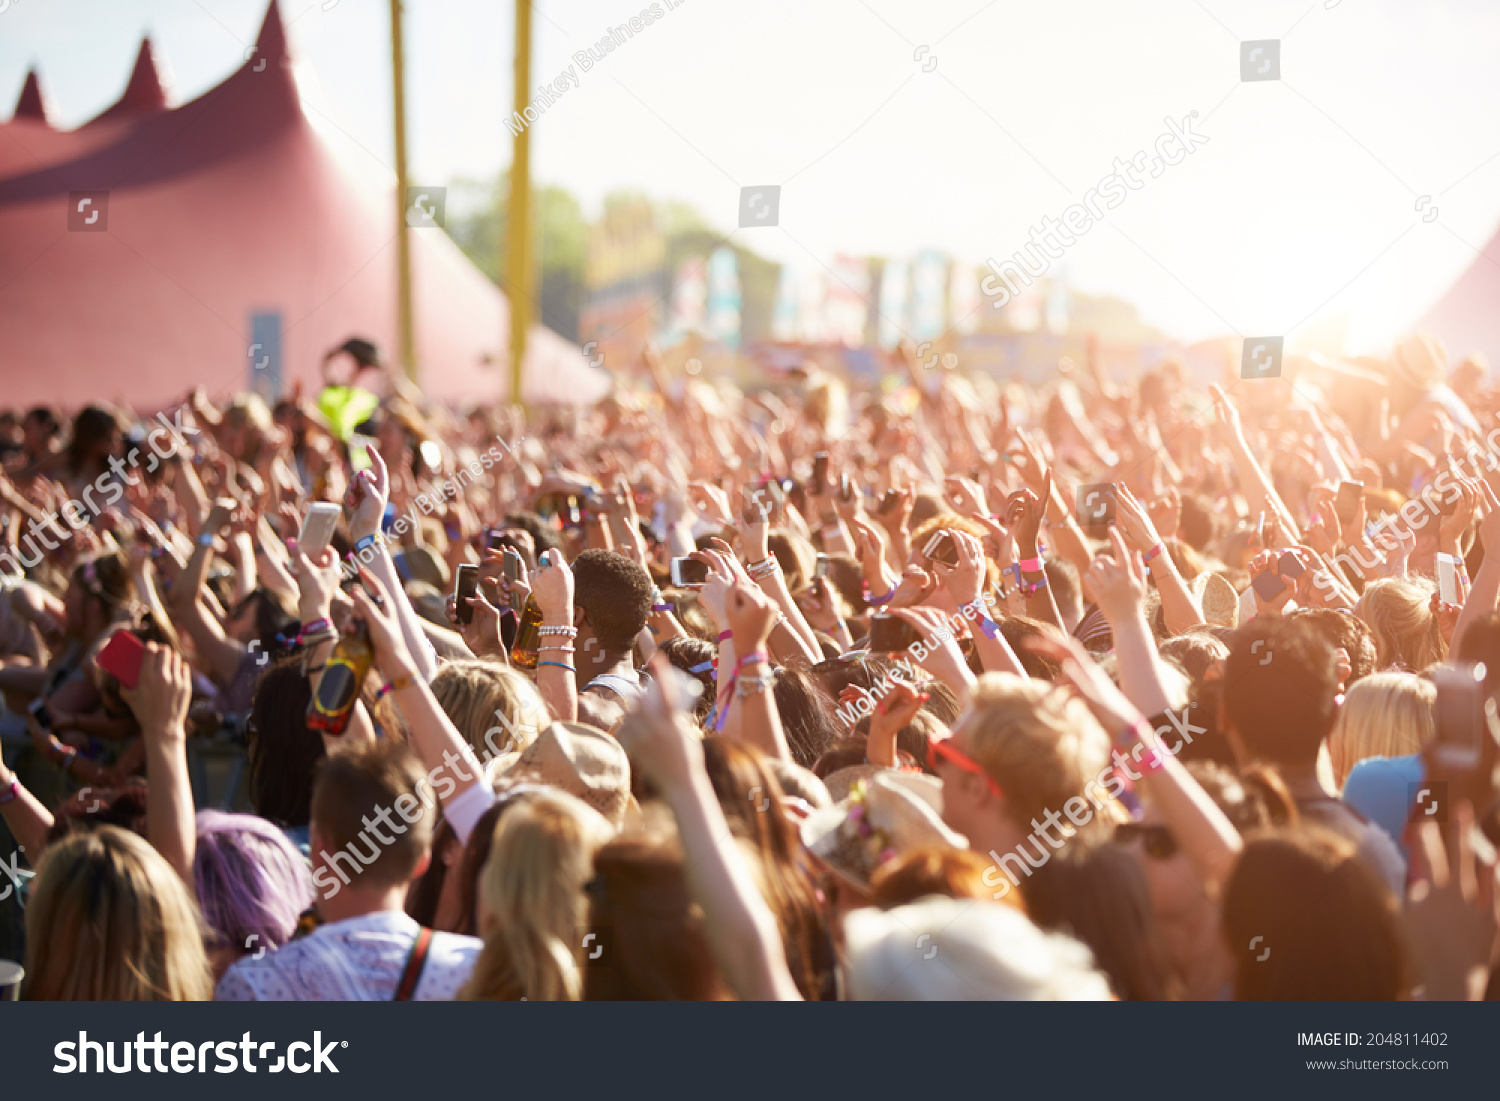 Audience At Outdoor Music Festival #204811402